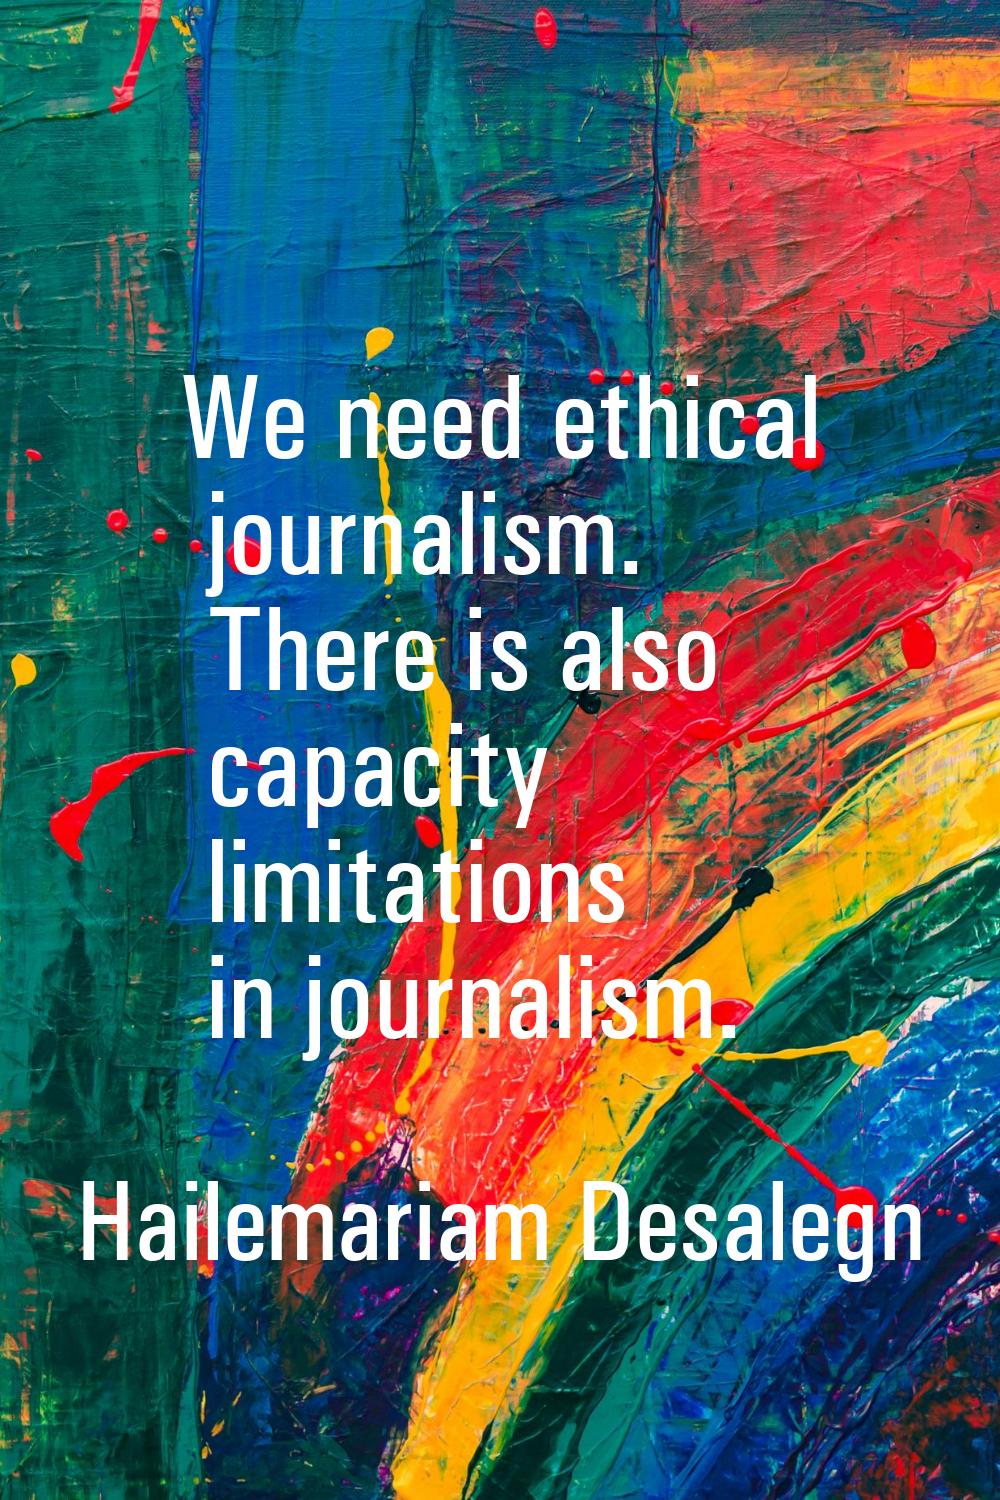 We need ethical journalism. There is also capacity limitations in journalism.